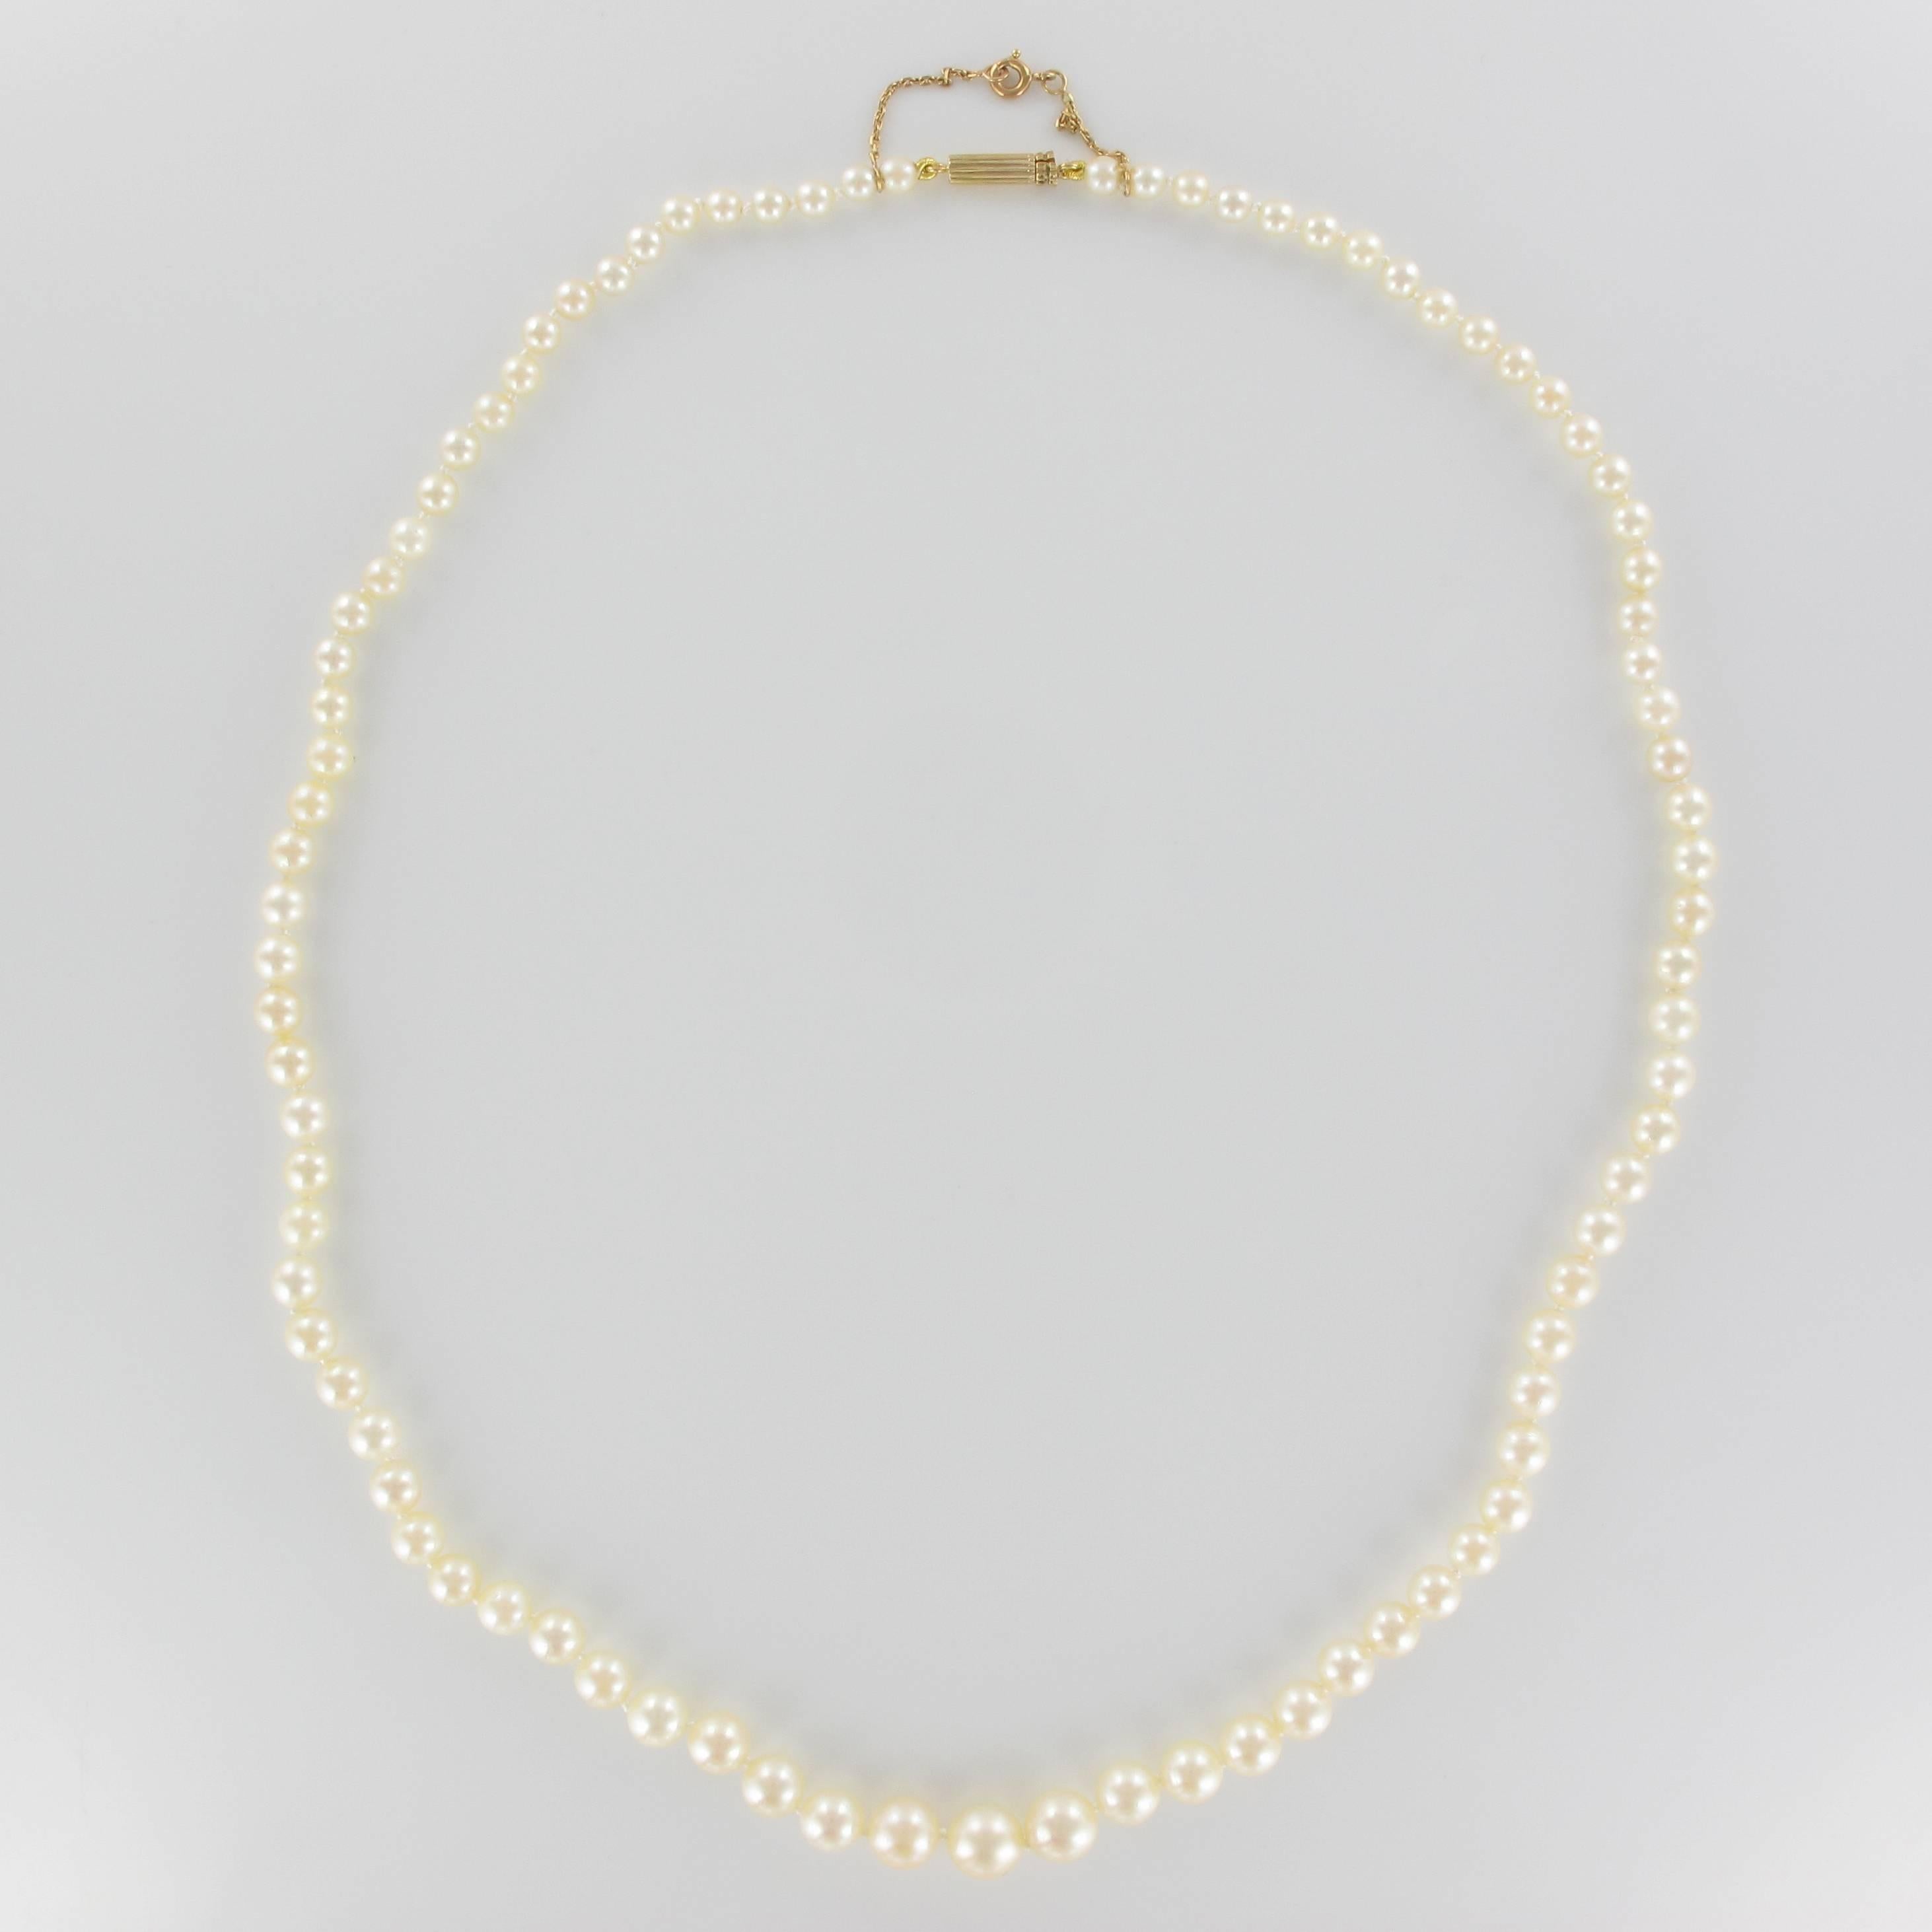 1950s Japanese Cultured Round White Pearl Necklace For Sale 2